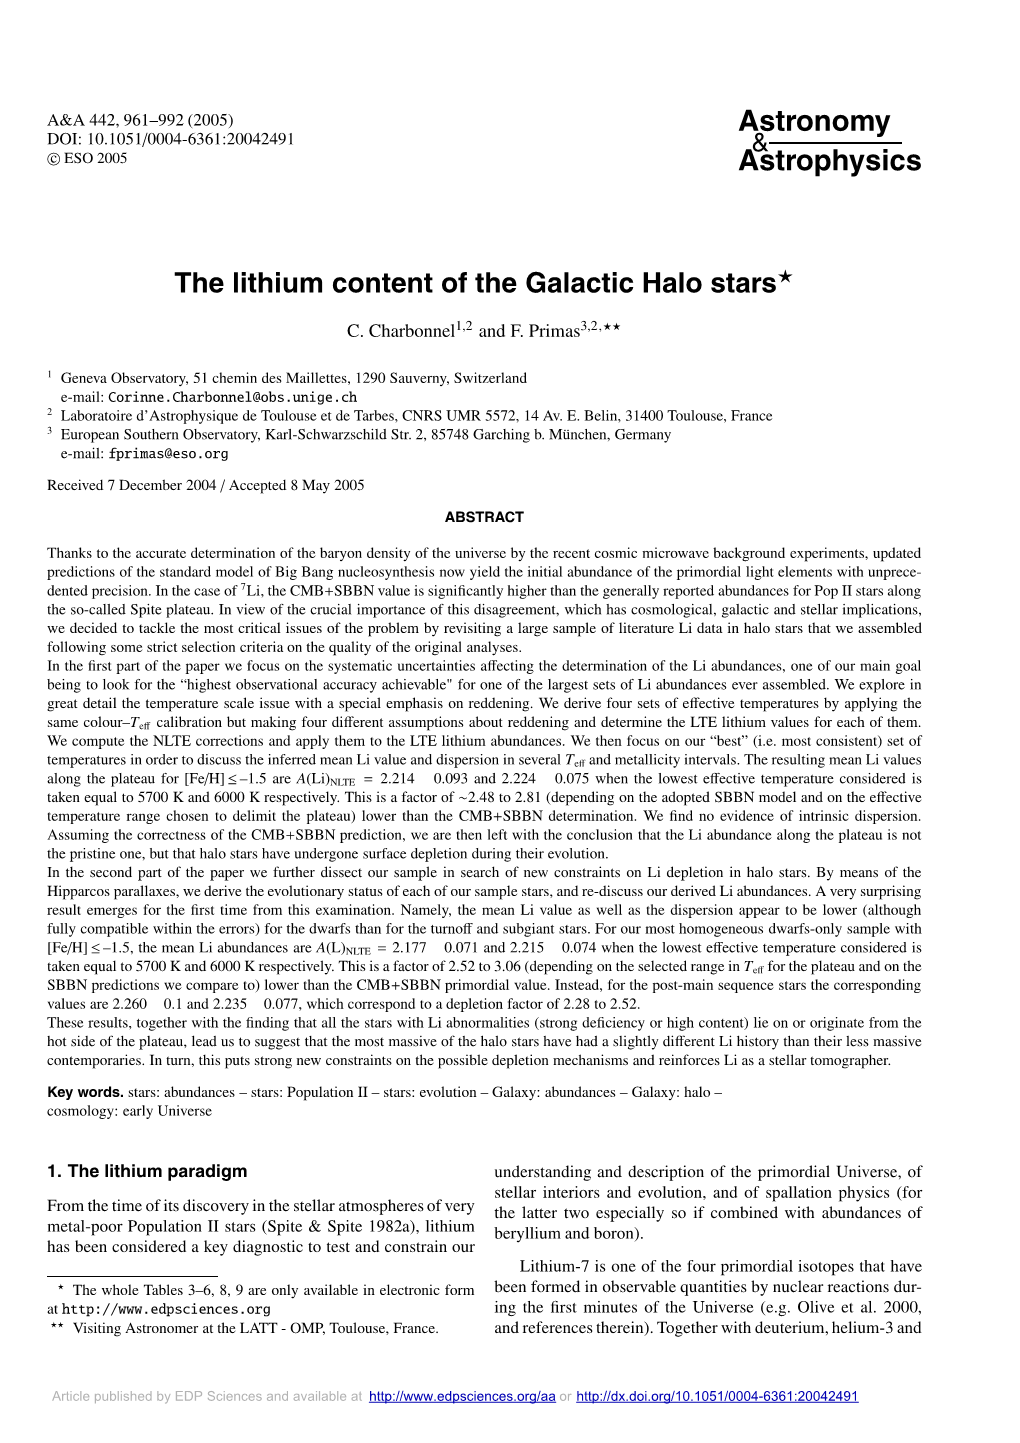 The Lithium Content of the Galactic Halo Stars